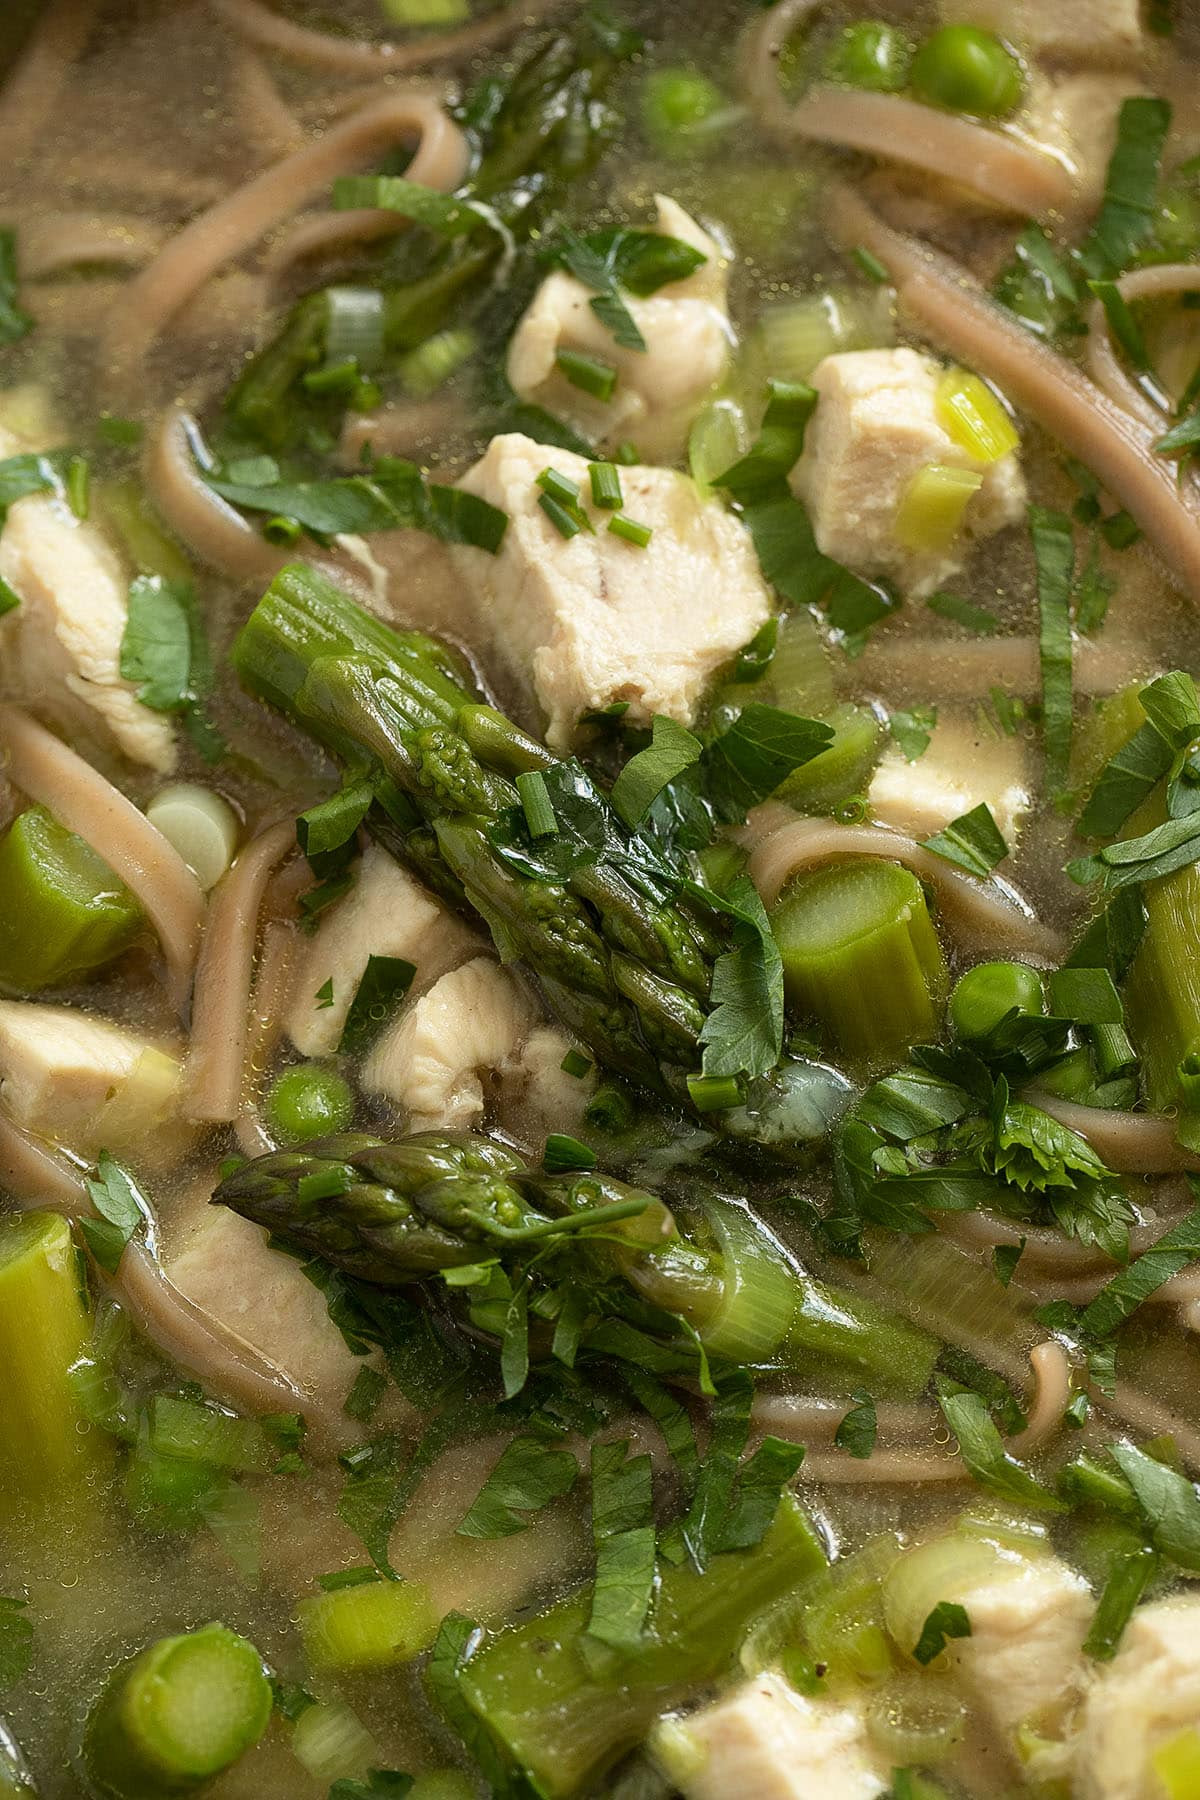 close up of asparagus tips and chicken breast pieces floating in noodle soup.